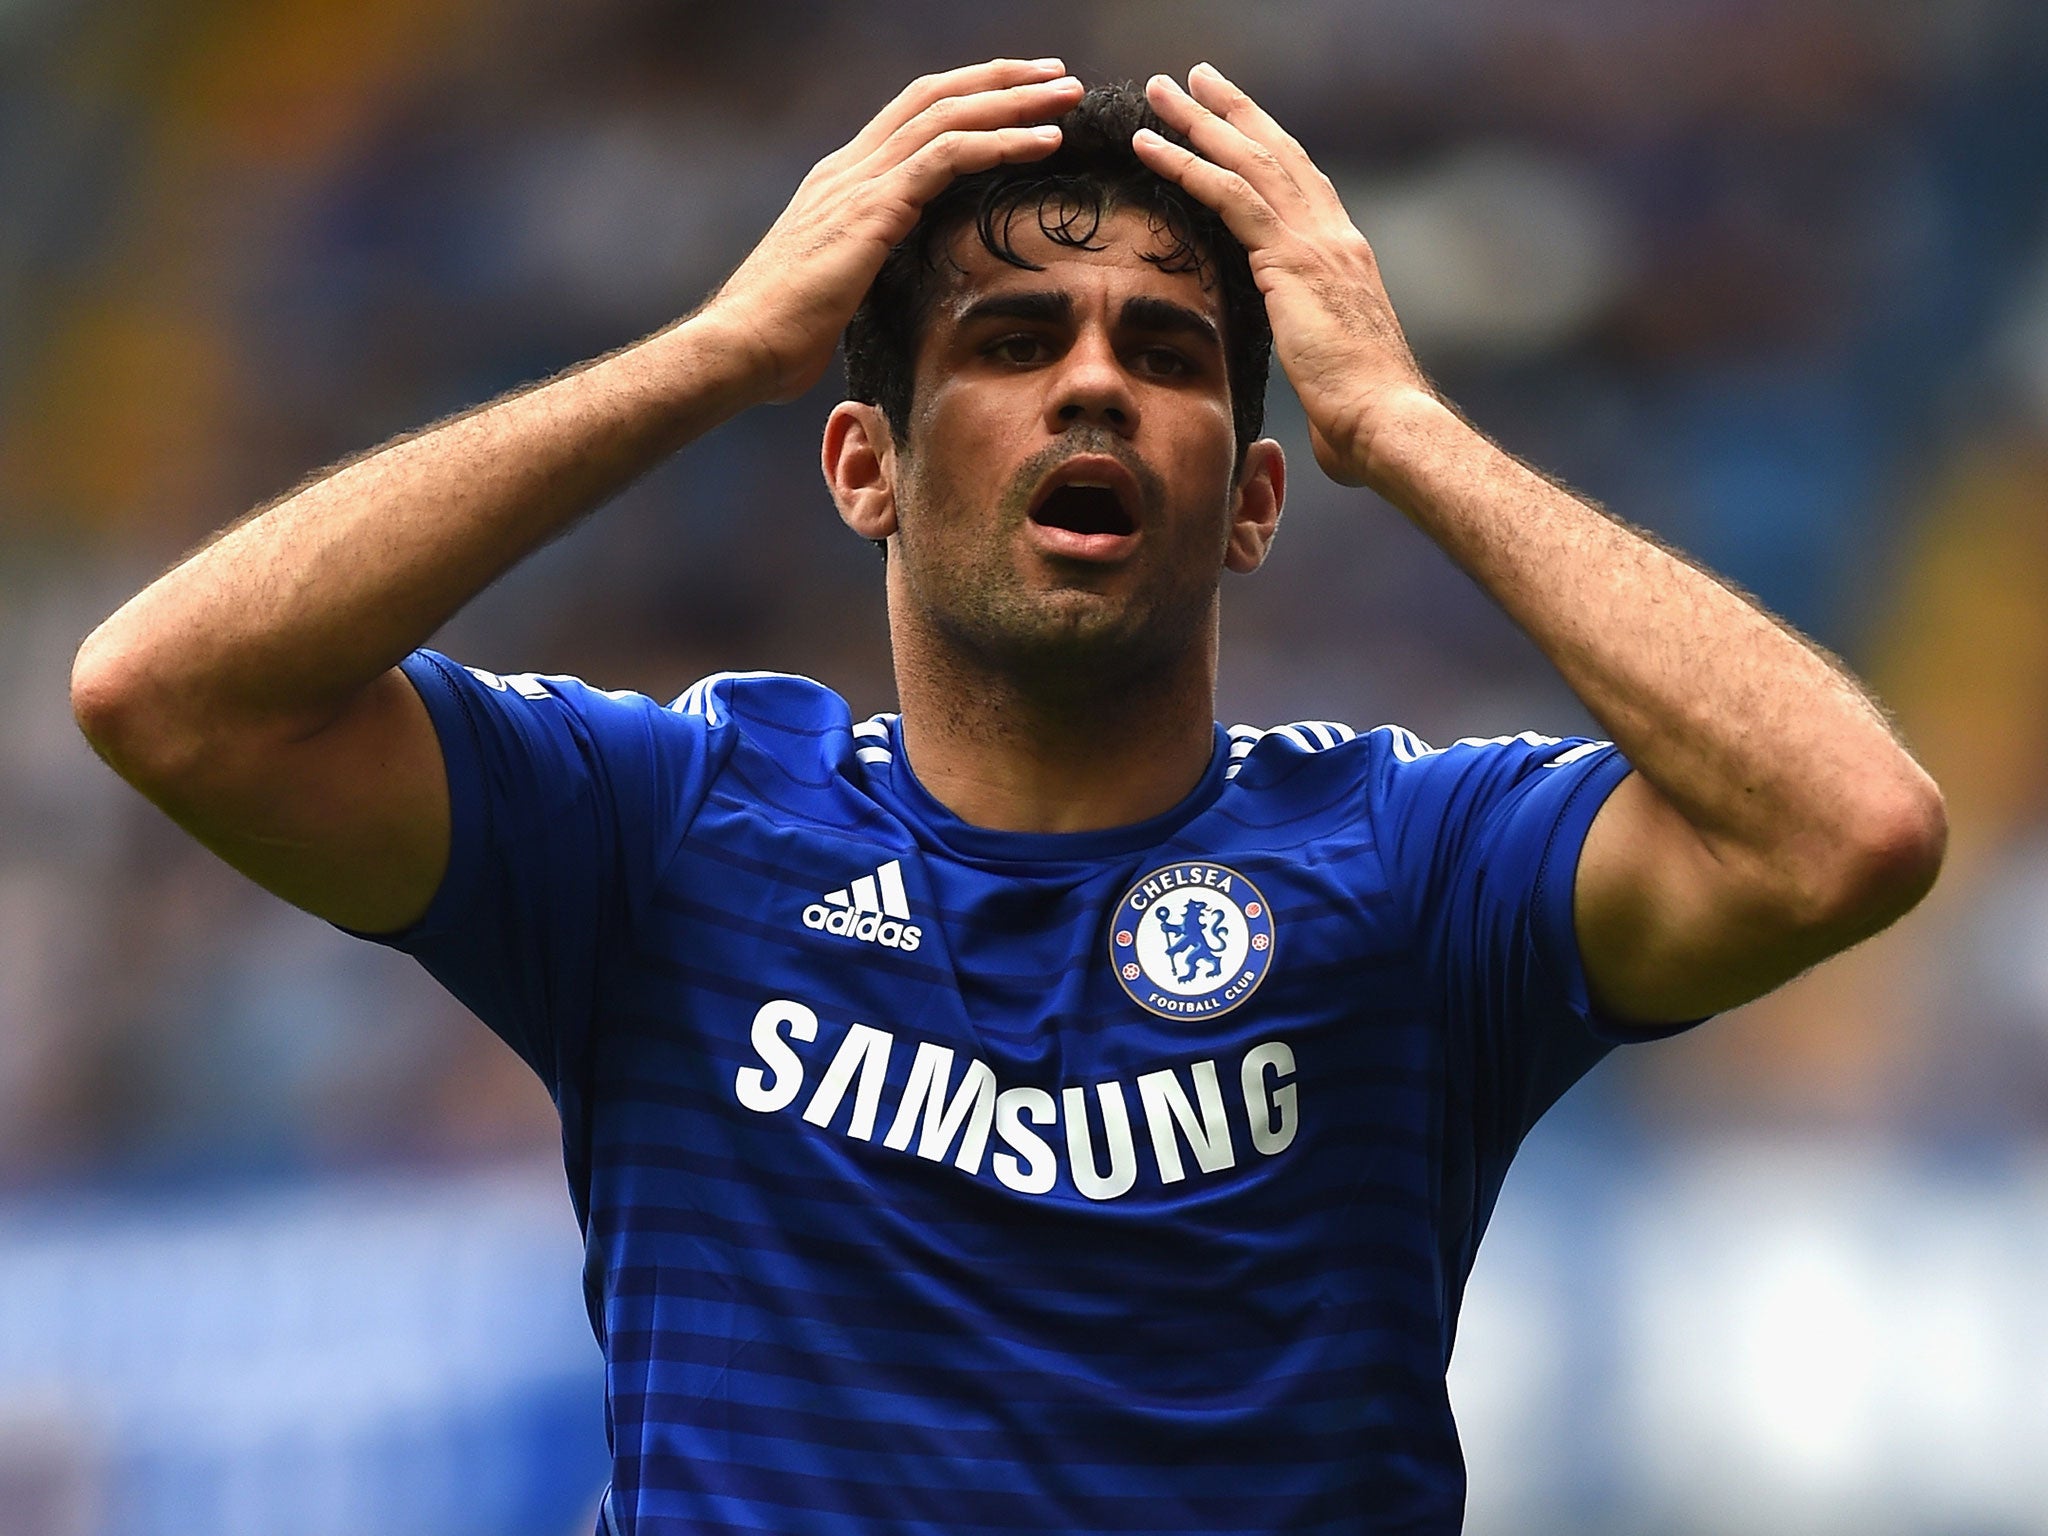 Diego Costa’s talent is undermined rather than enhanced by his propensity to foul opponents